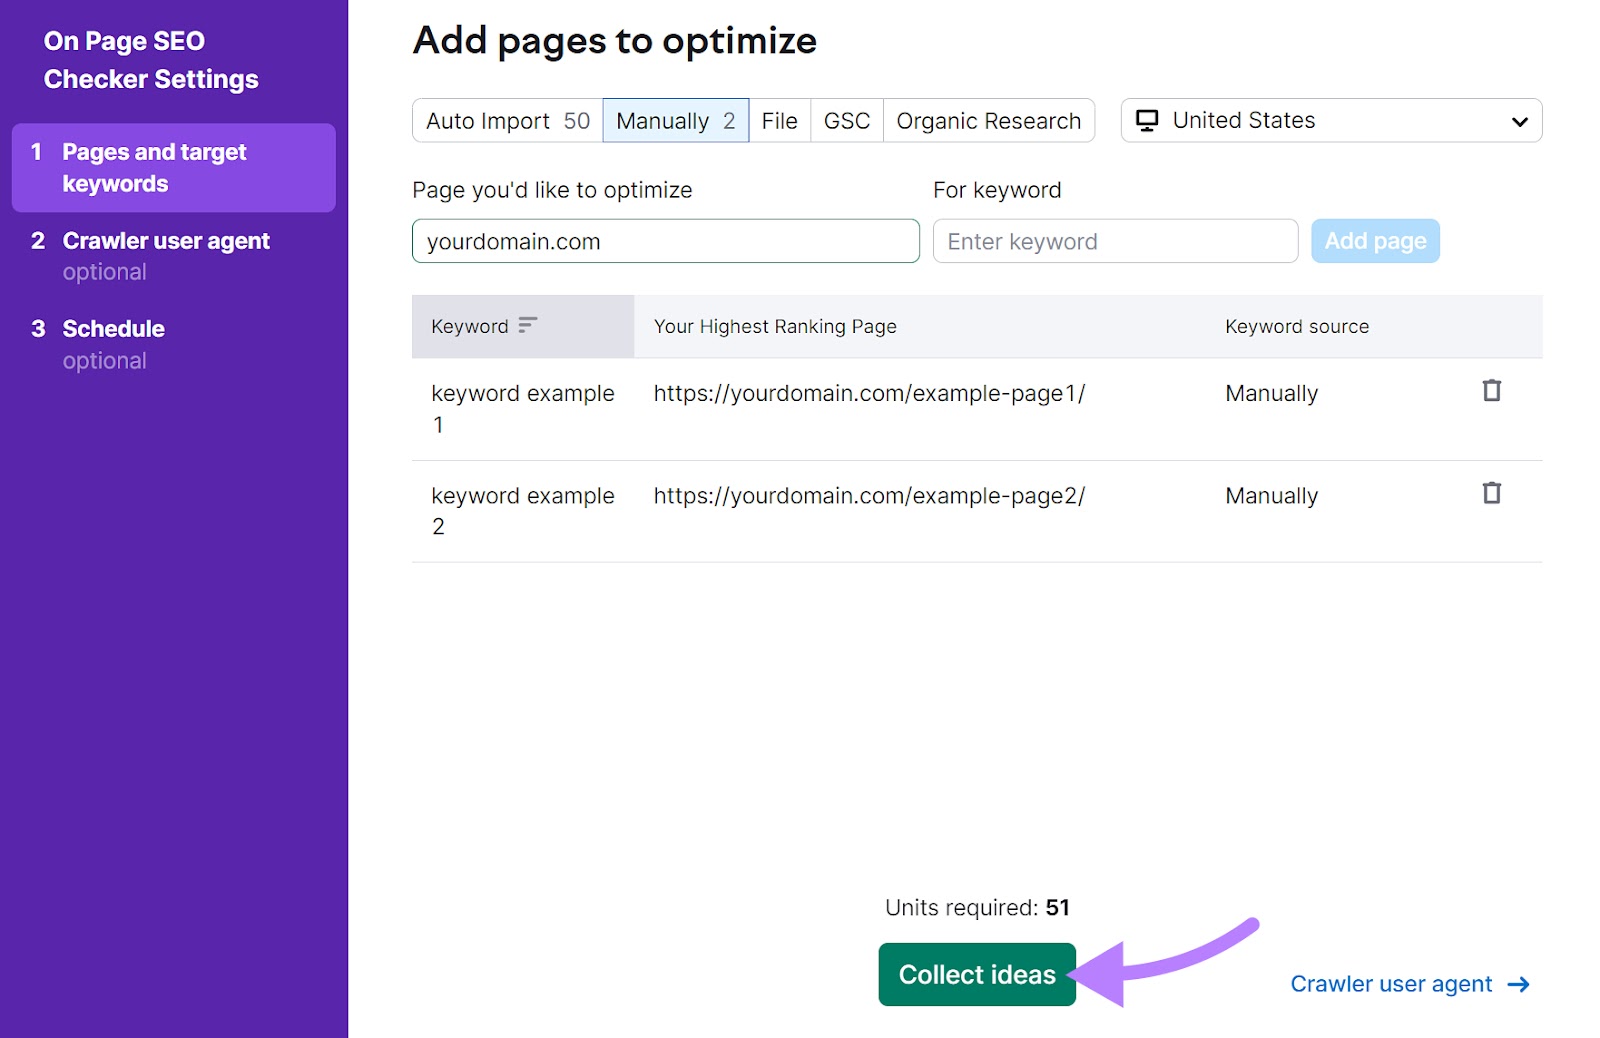 Add pages to optmize to On Page SEO Checker tool